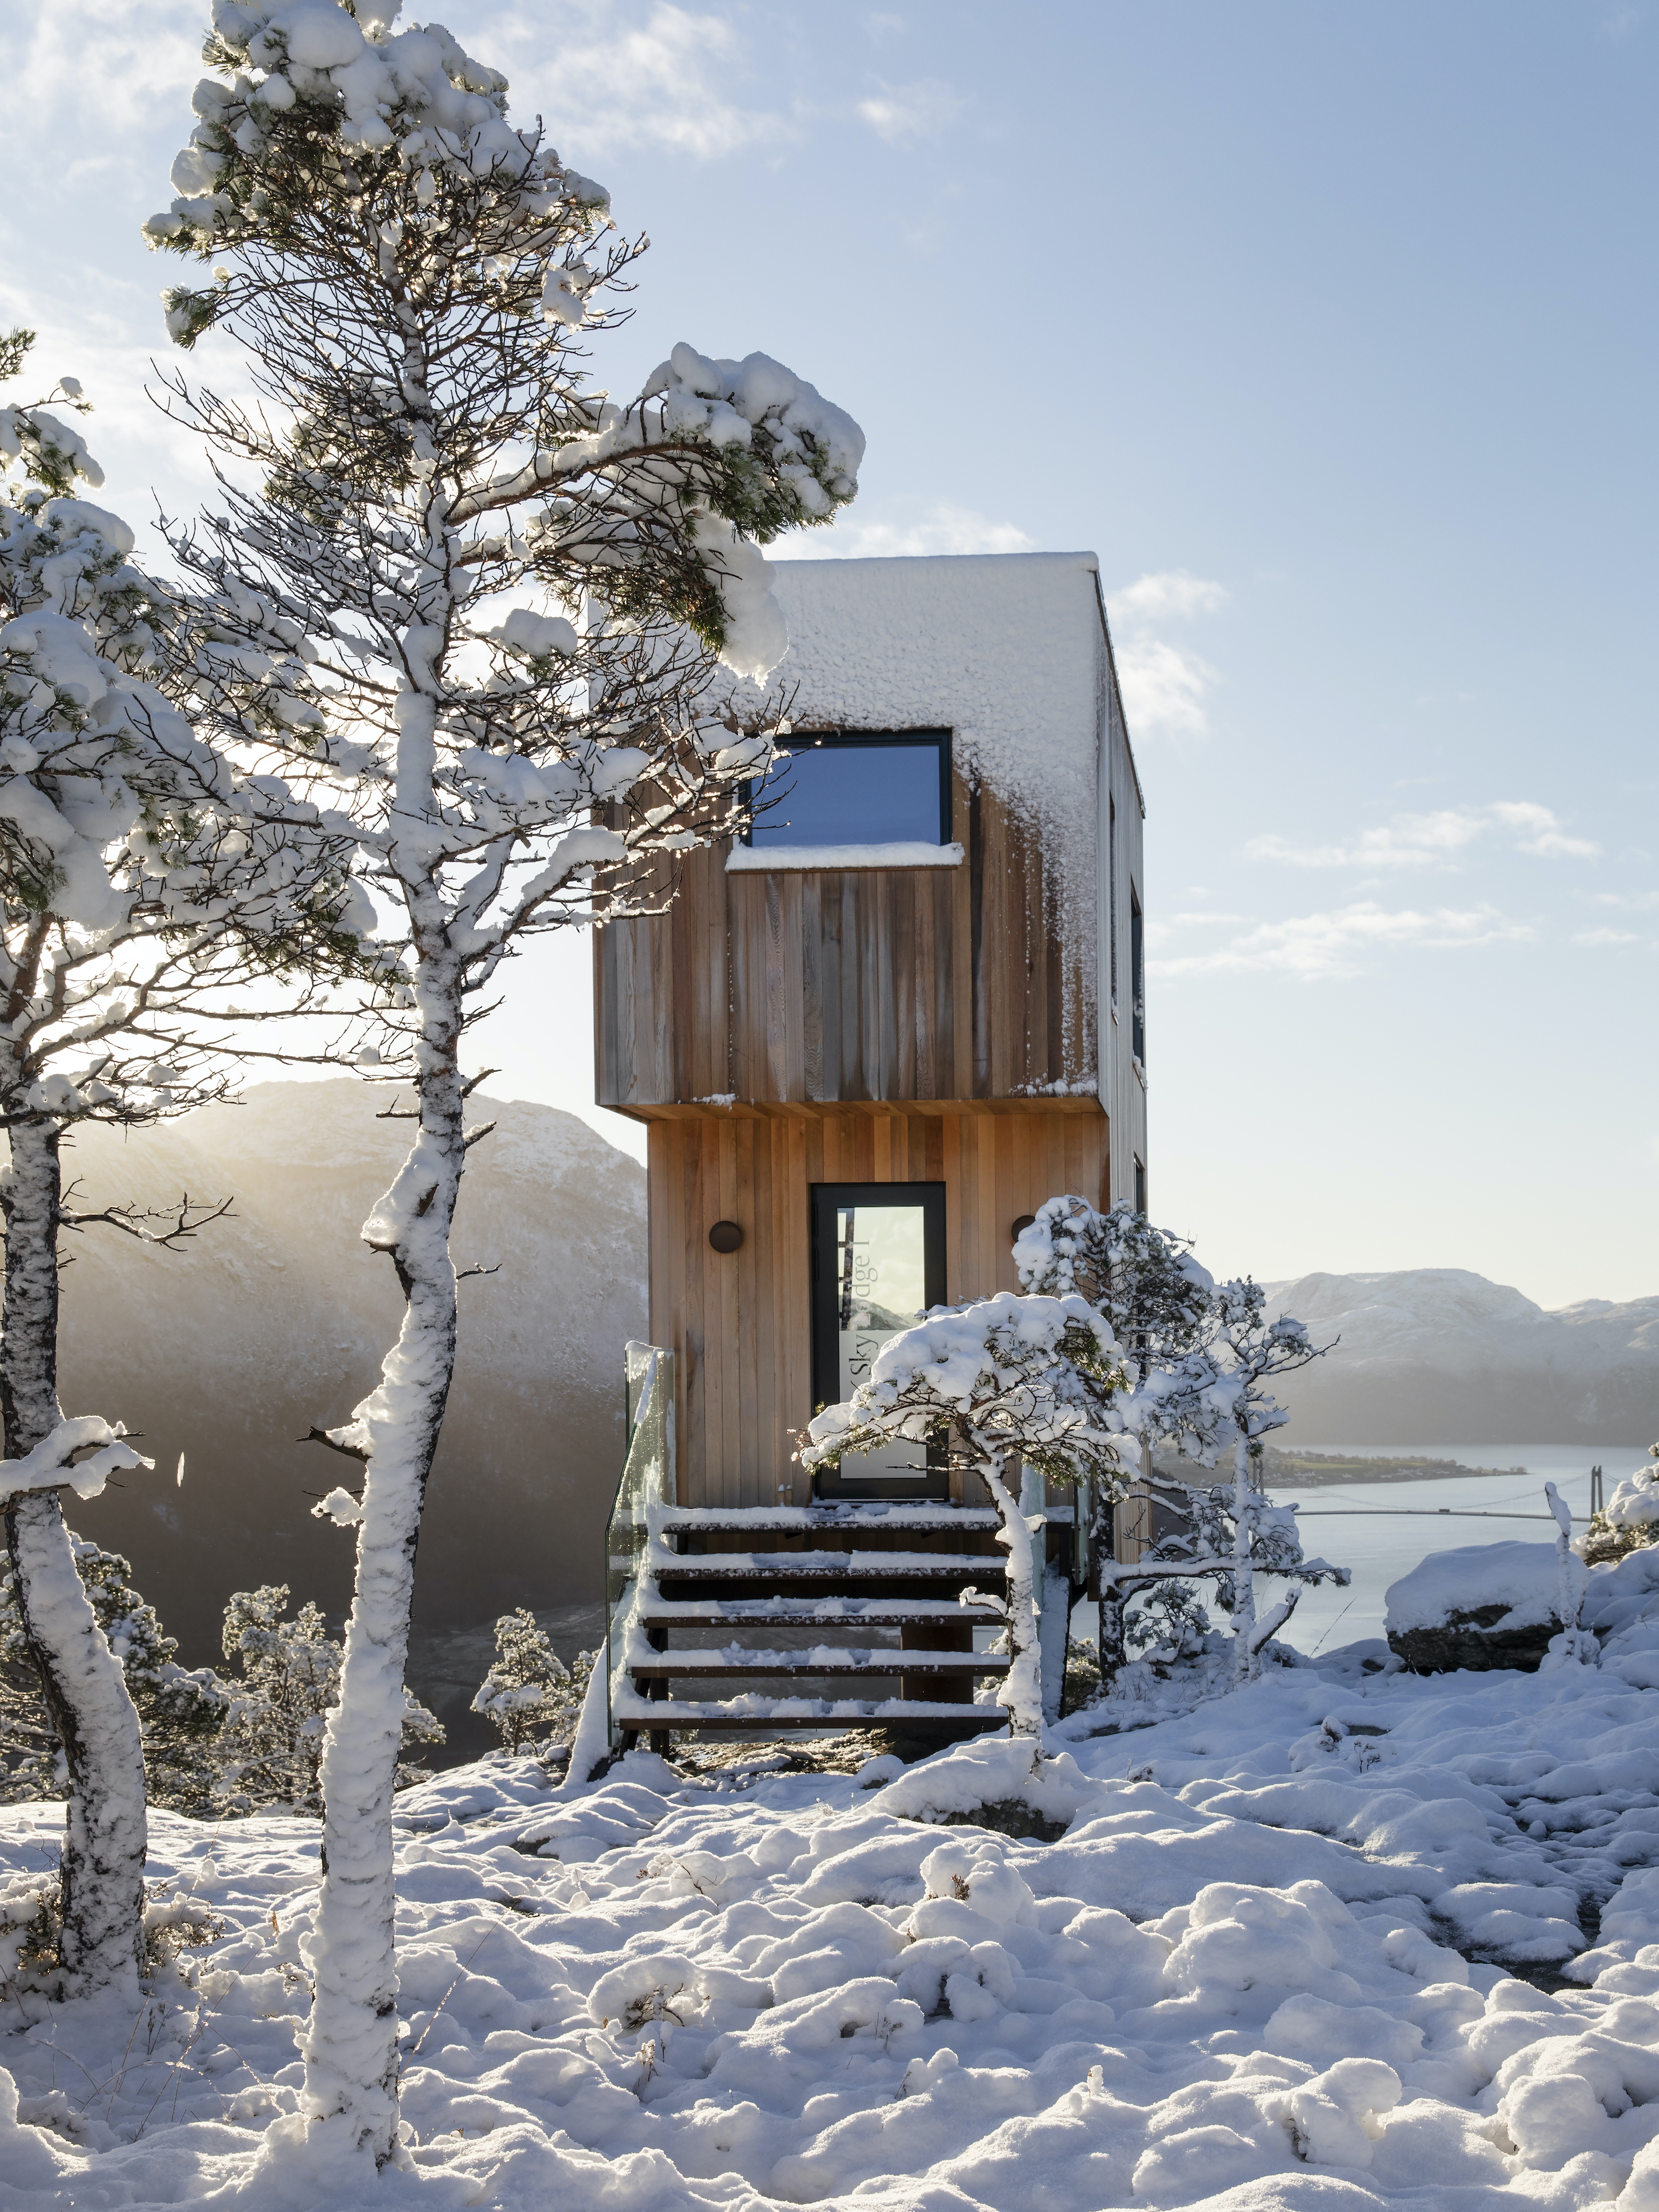 architect john birger grytdal of norgeshus designed the star lodge hideouts as  9